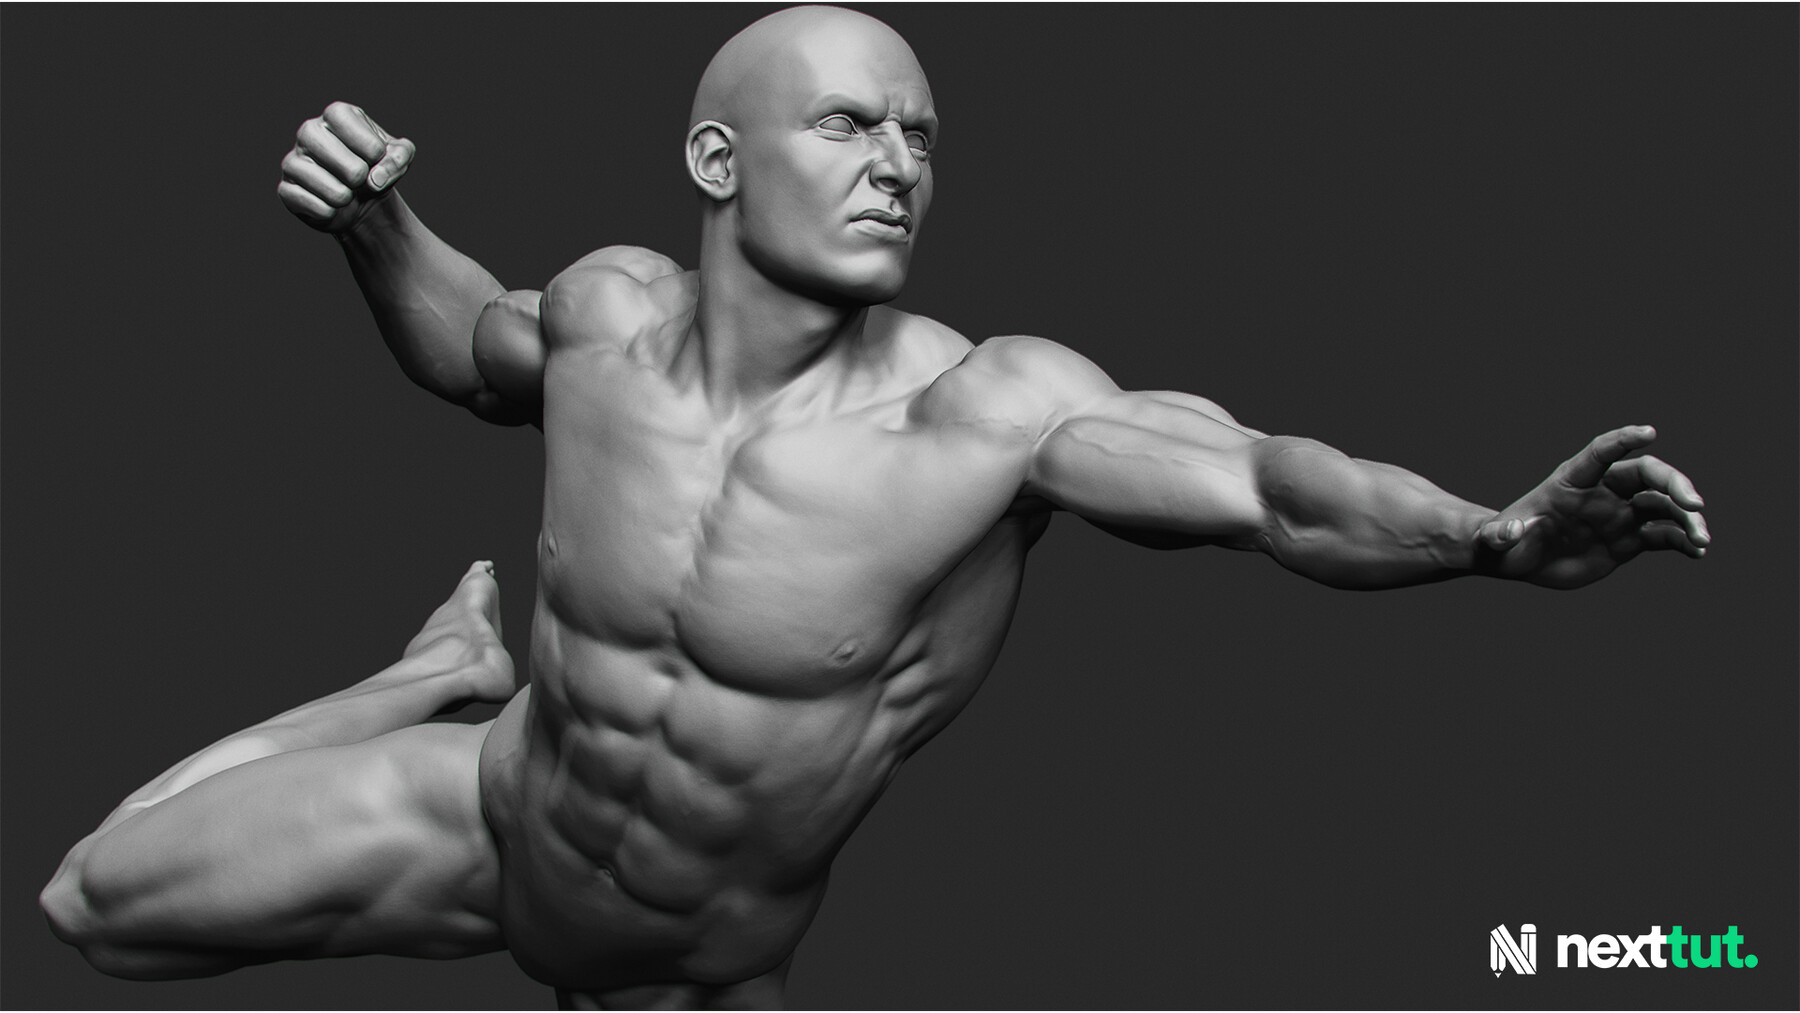 ArtStation - Dynamic Male Anatomy for Artists in Zbrush | Tutorials